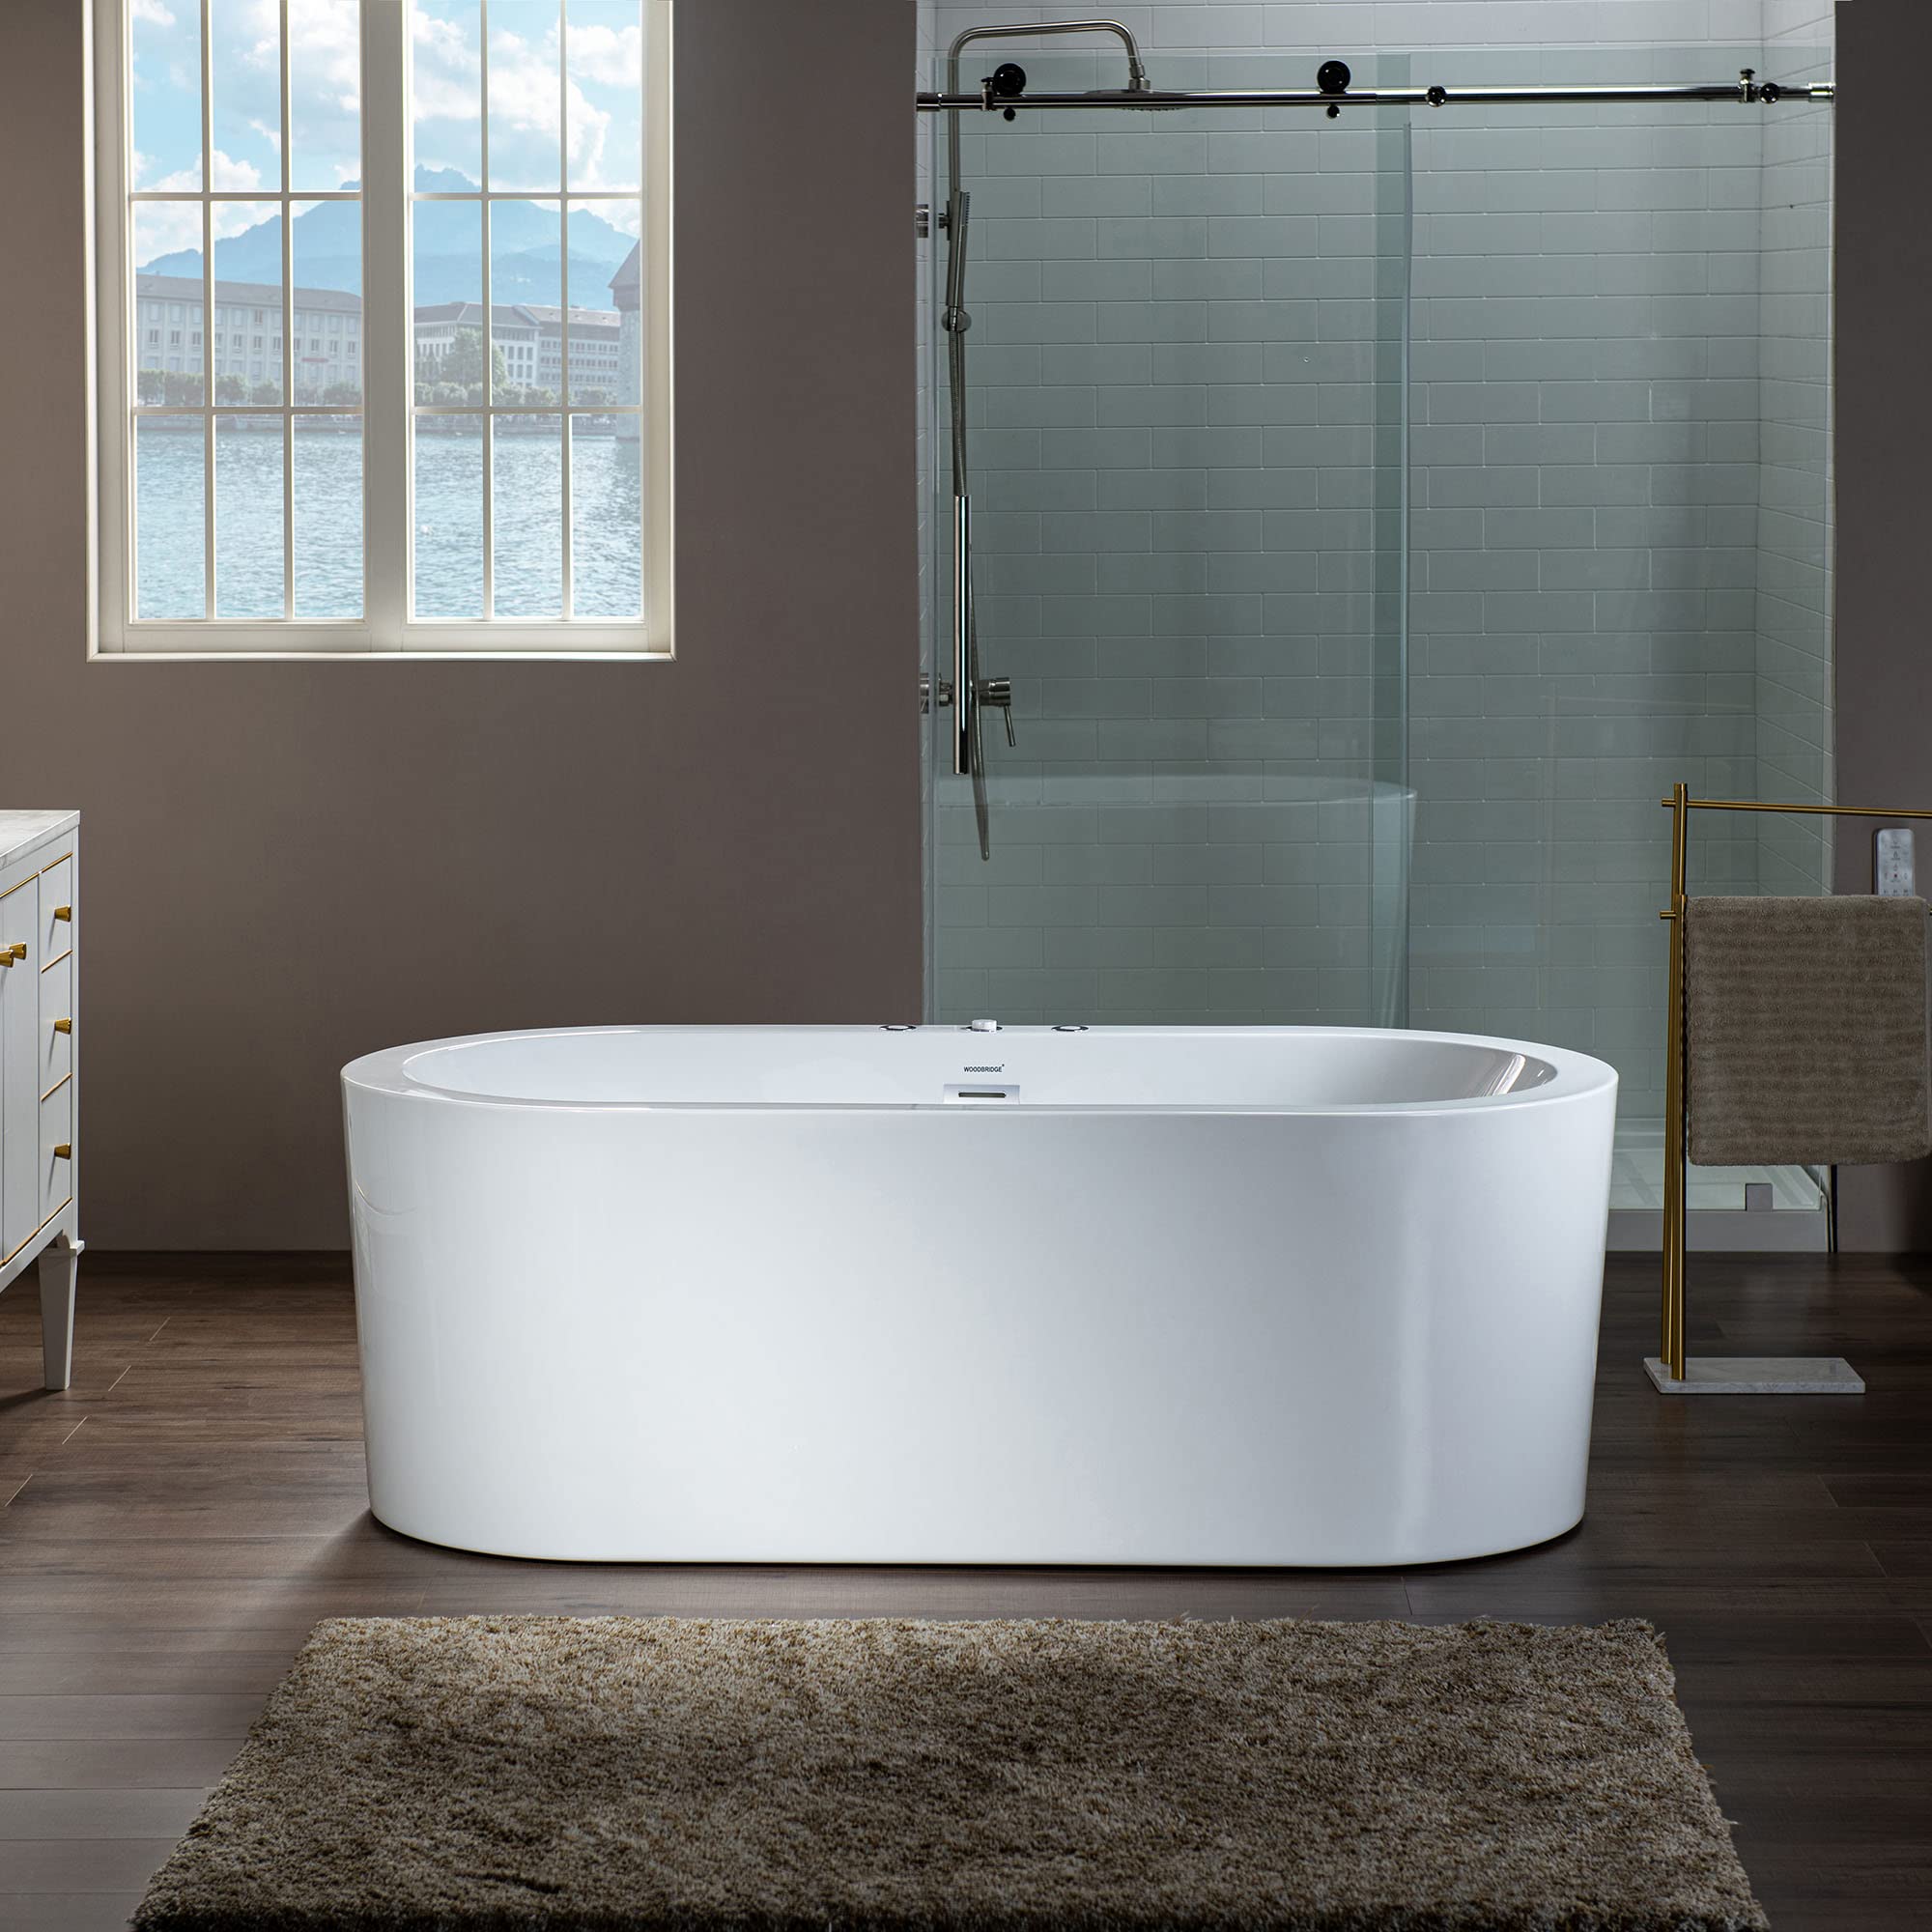 WOODBRIDGE 66-1/2" x 31-7/8" Whirlpool Water Jetted and Air Bubble Freestanding Heated Soaking Combination Bathtub, BJ200